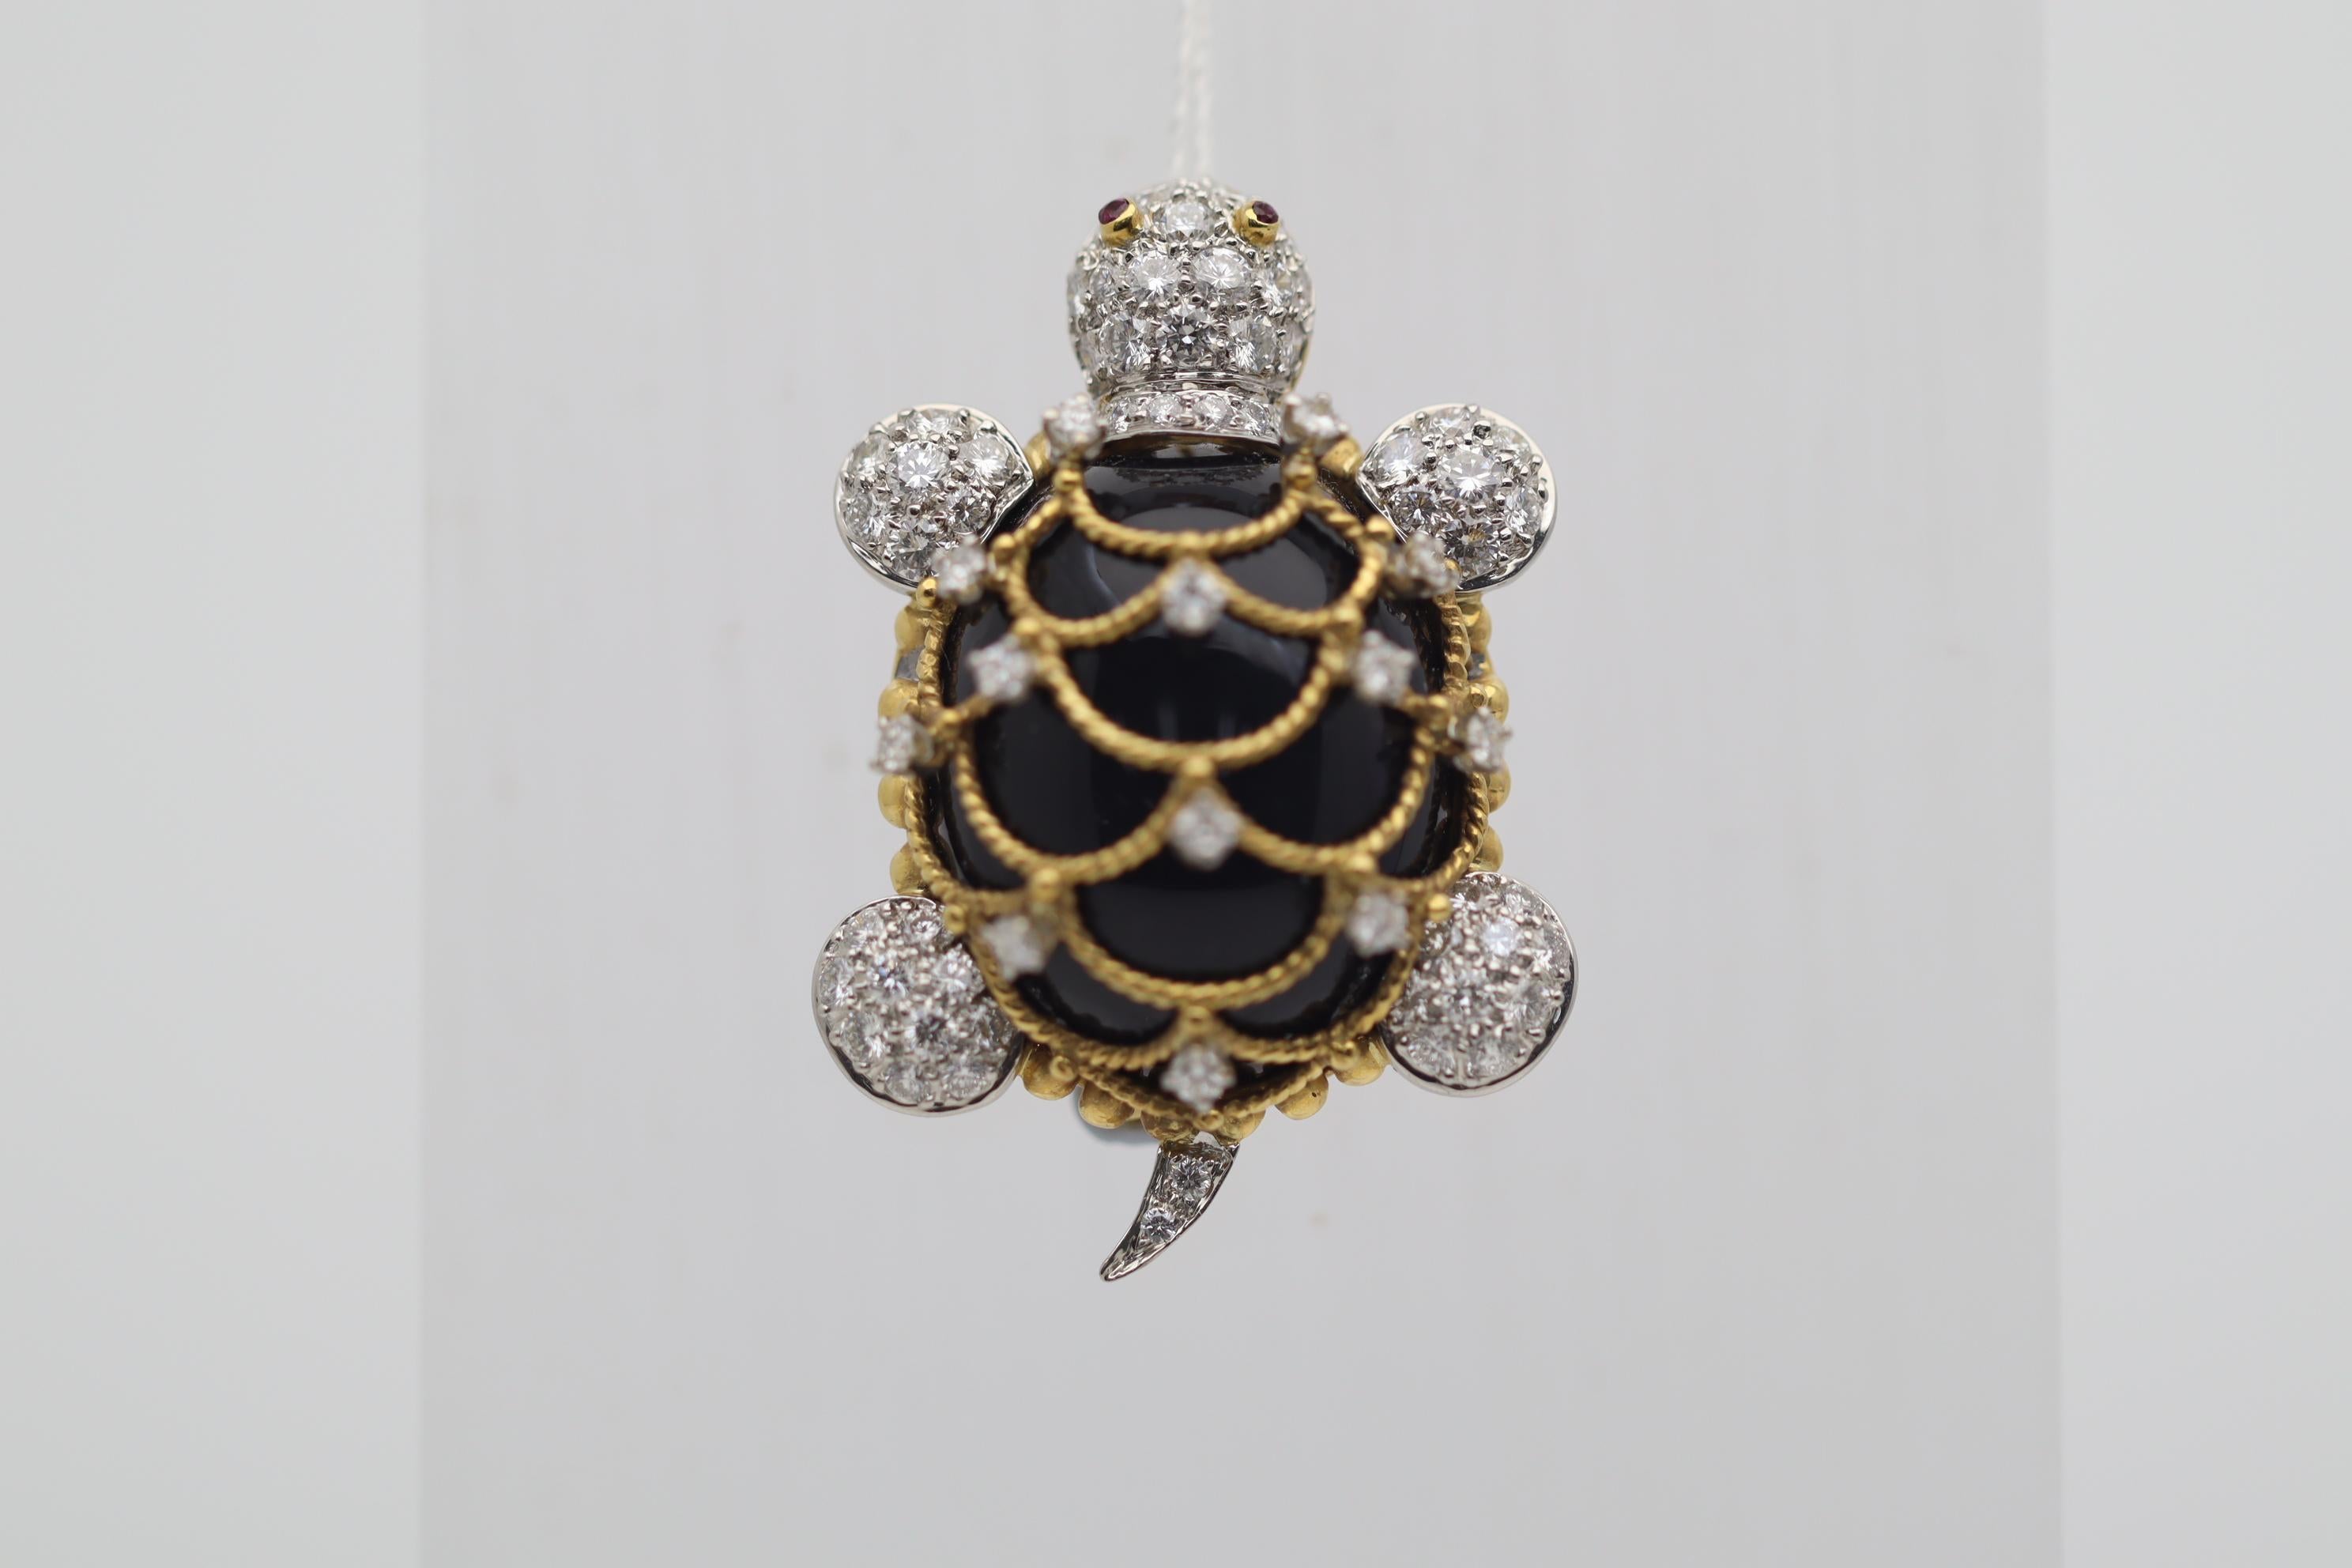 A super sweet and well-made diamond studded turtle brooch! Its shell is made of a single piece of polished black onyx which is webbed with stands of 18k yellow gold making the shell's pattern. Adding to that, 2.10 carats of round brilliant-cut